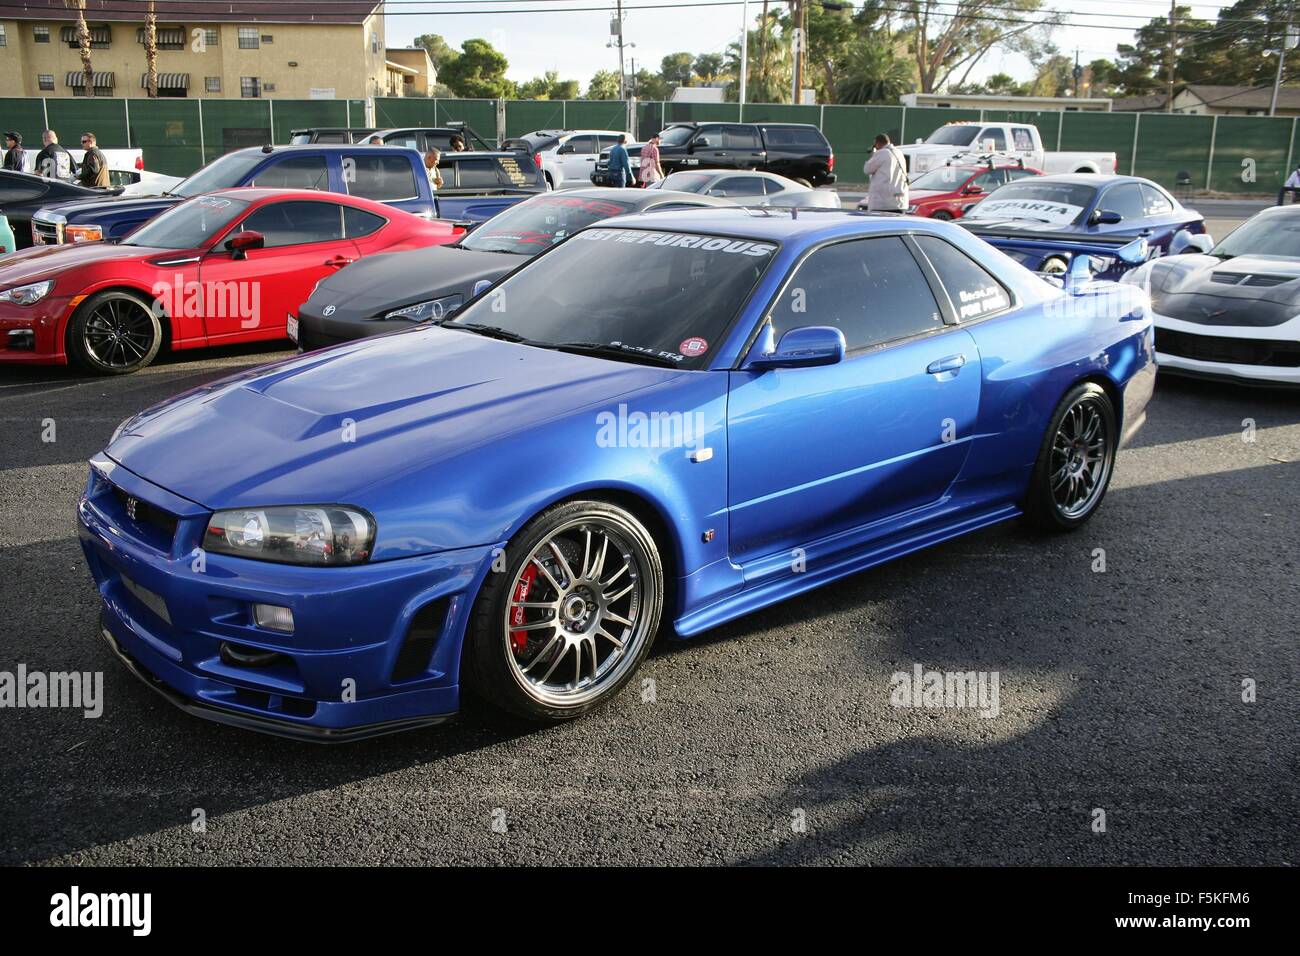 Las Vegas, NV, USA. 5th Nov, 2015. Actor Paul Walker's R34 Nissan Skyline  GT-R Car from 'Fast and Furious' Movie in attendance for The 2015 SEMA Show  - THU, Las Vegas Convention